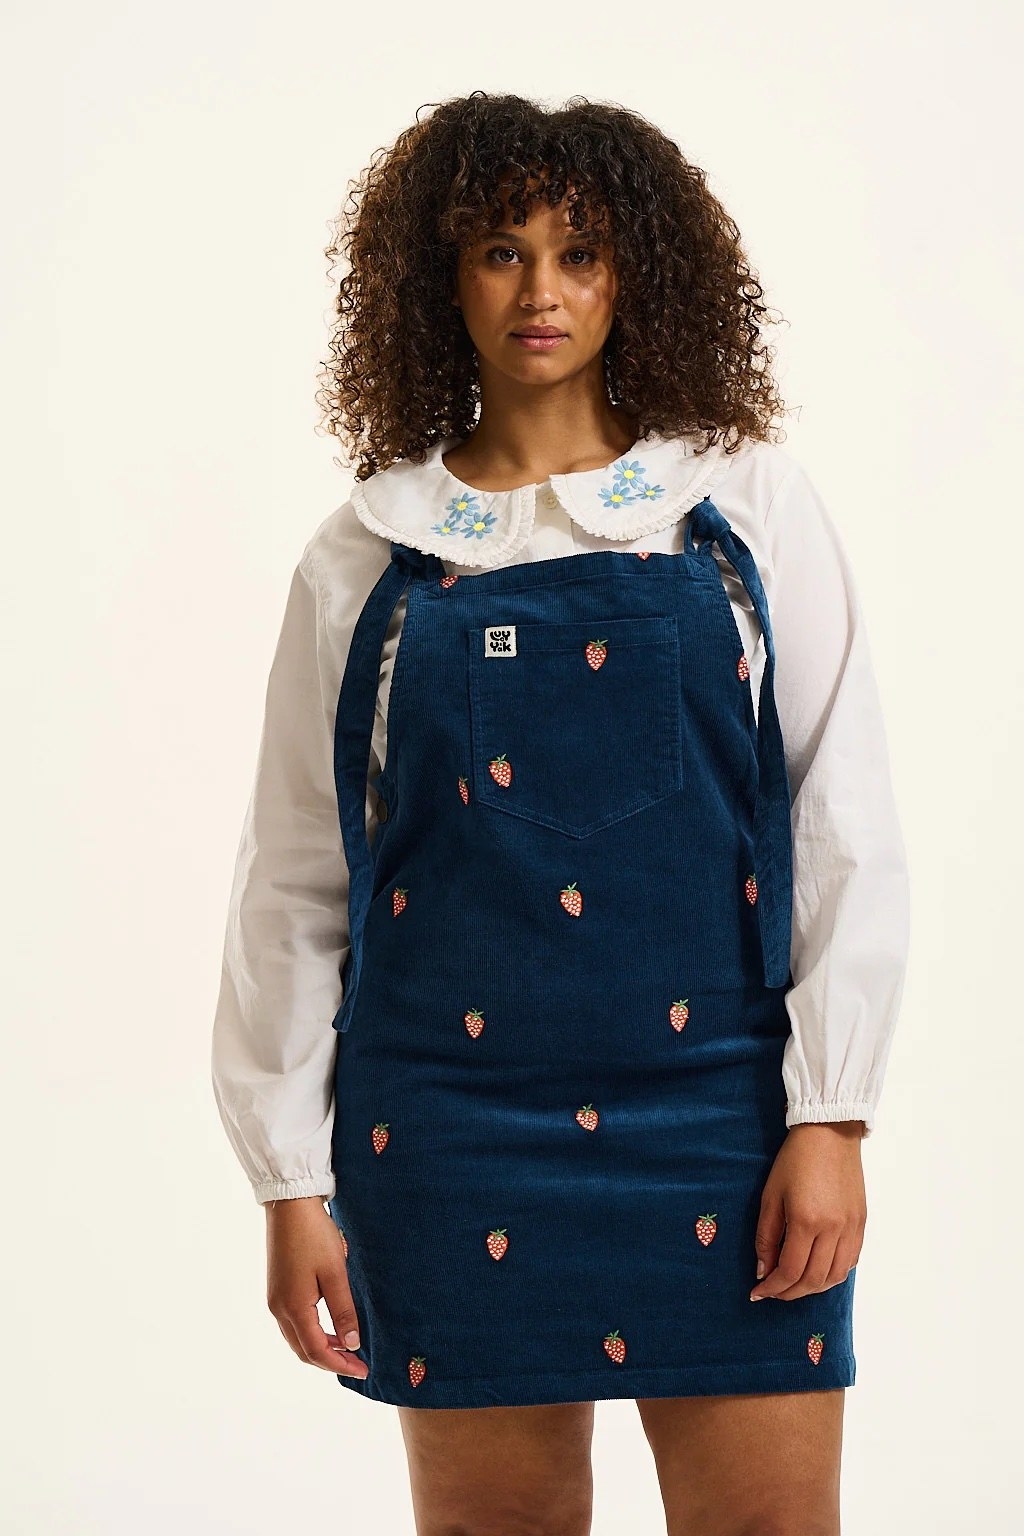 model in dark blue corduroy mini overall dress with tie straps and an embroidered strawberry print pattern